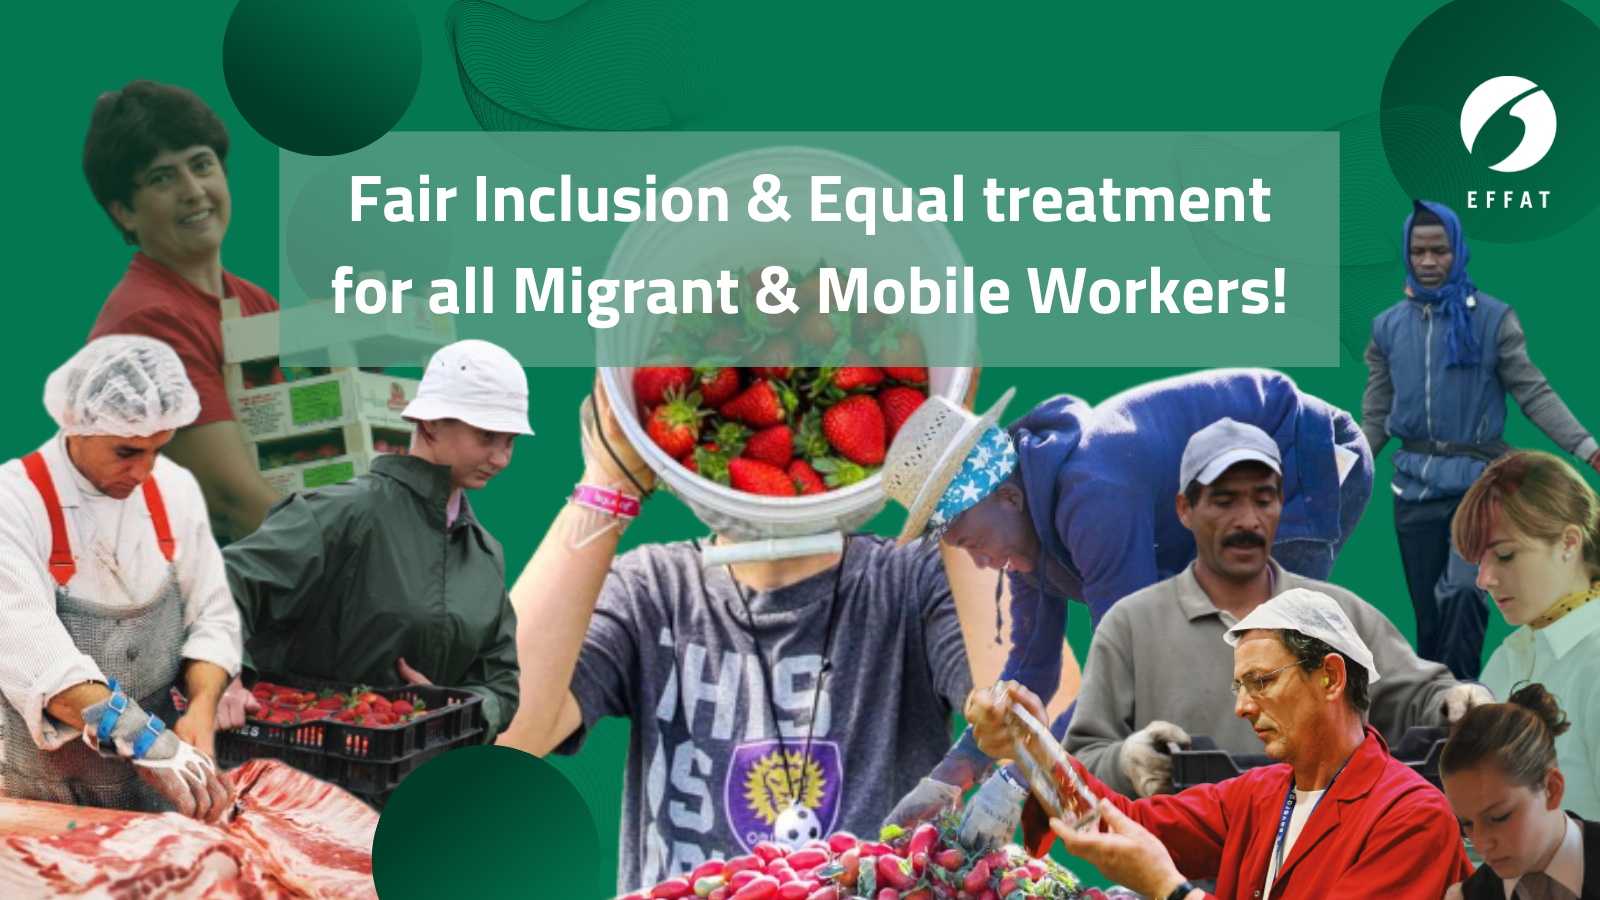 BANNER-mobile-and-migrant-workers-TWITTER (c) EFFAT